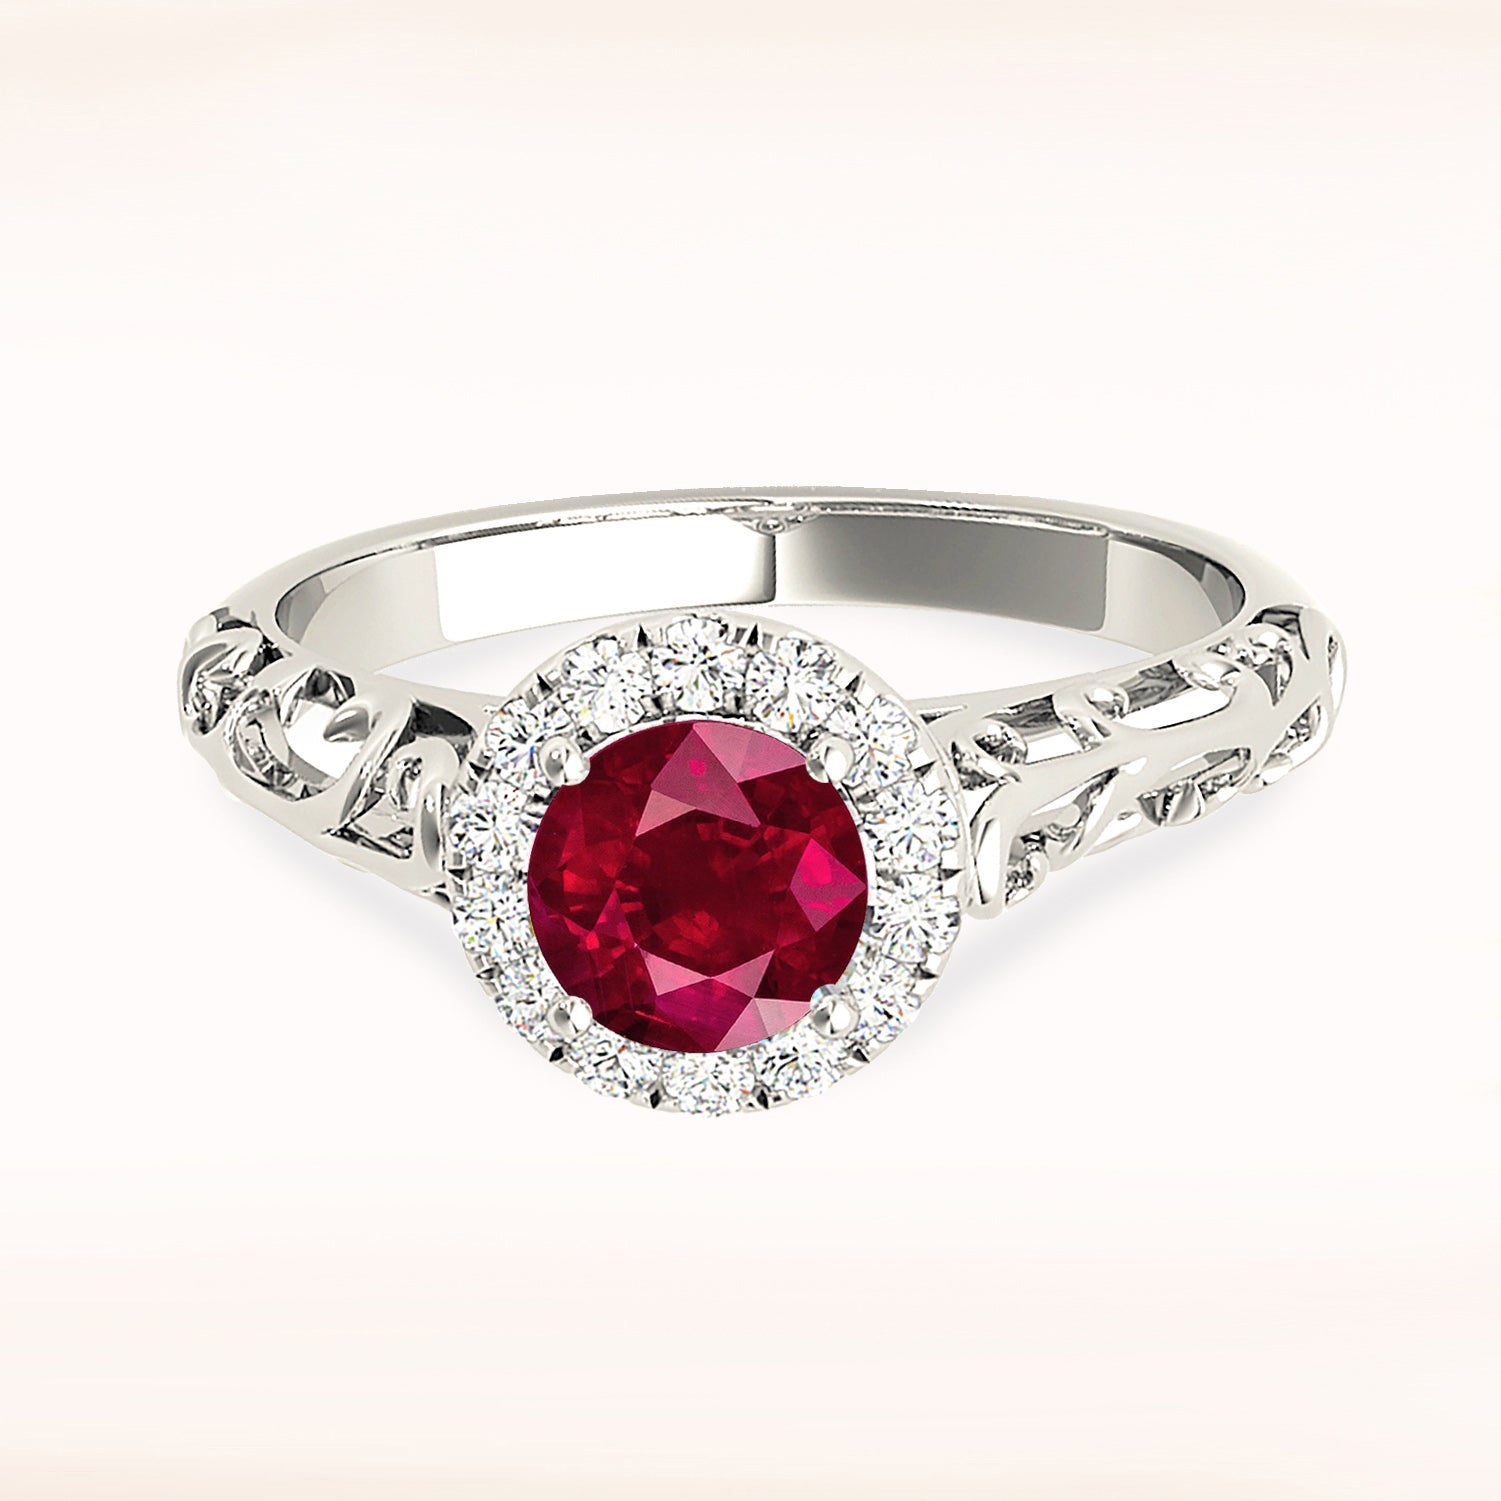 1.16 ct. Genuine Ruby Ring With 0.10 ctw. Diamond Halo , Hand Caved Filigree Fancy Band | Round Ruby Halo Ring | Natural Ruby Ring-in 14K/18K White, Yellow, Rose Gold and Platinum - Christmas Jewelry Gift -VIRABYANI